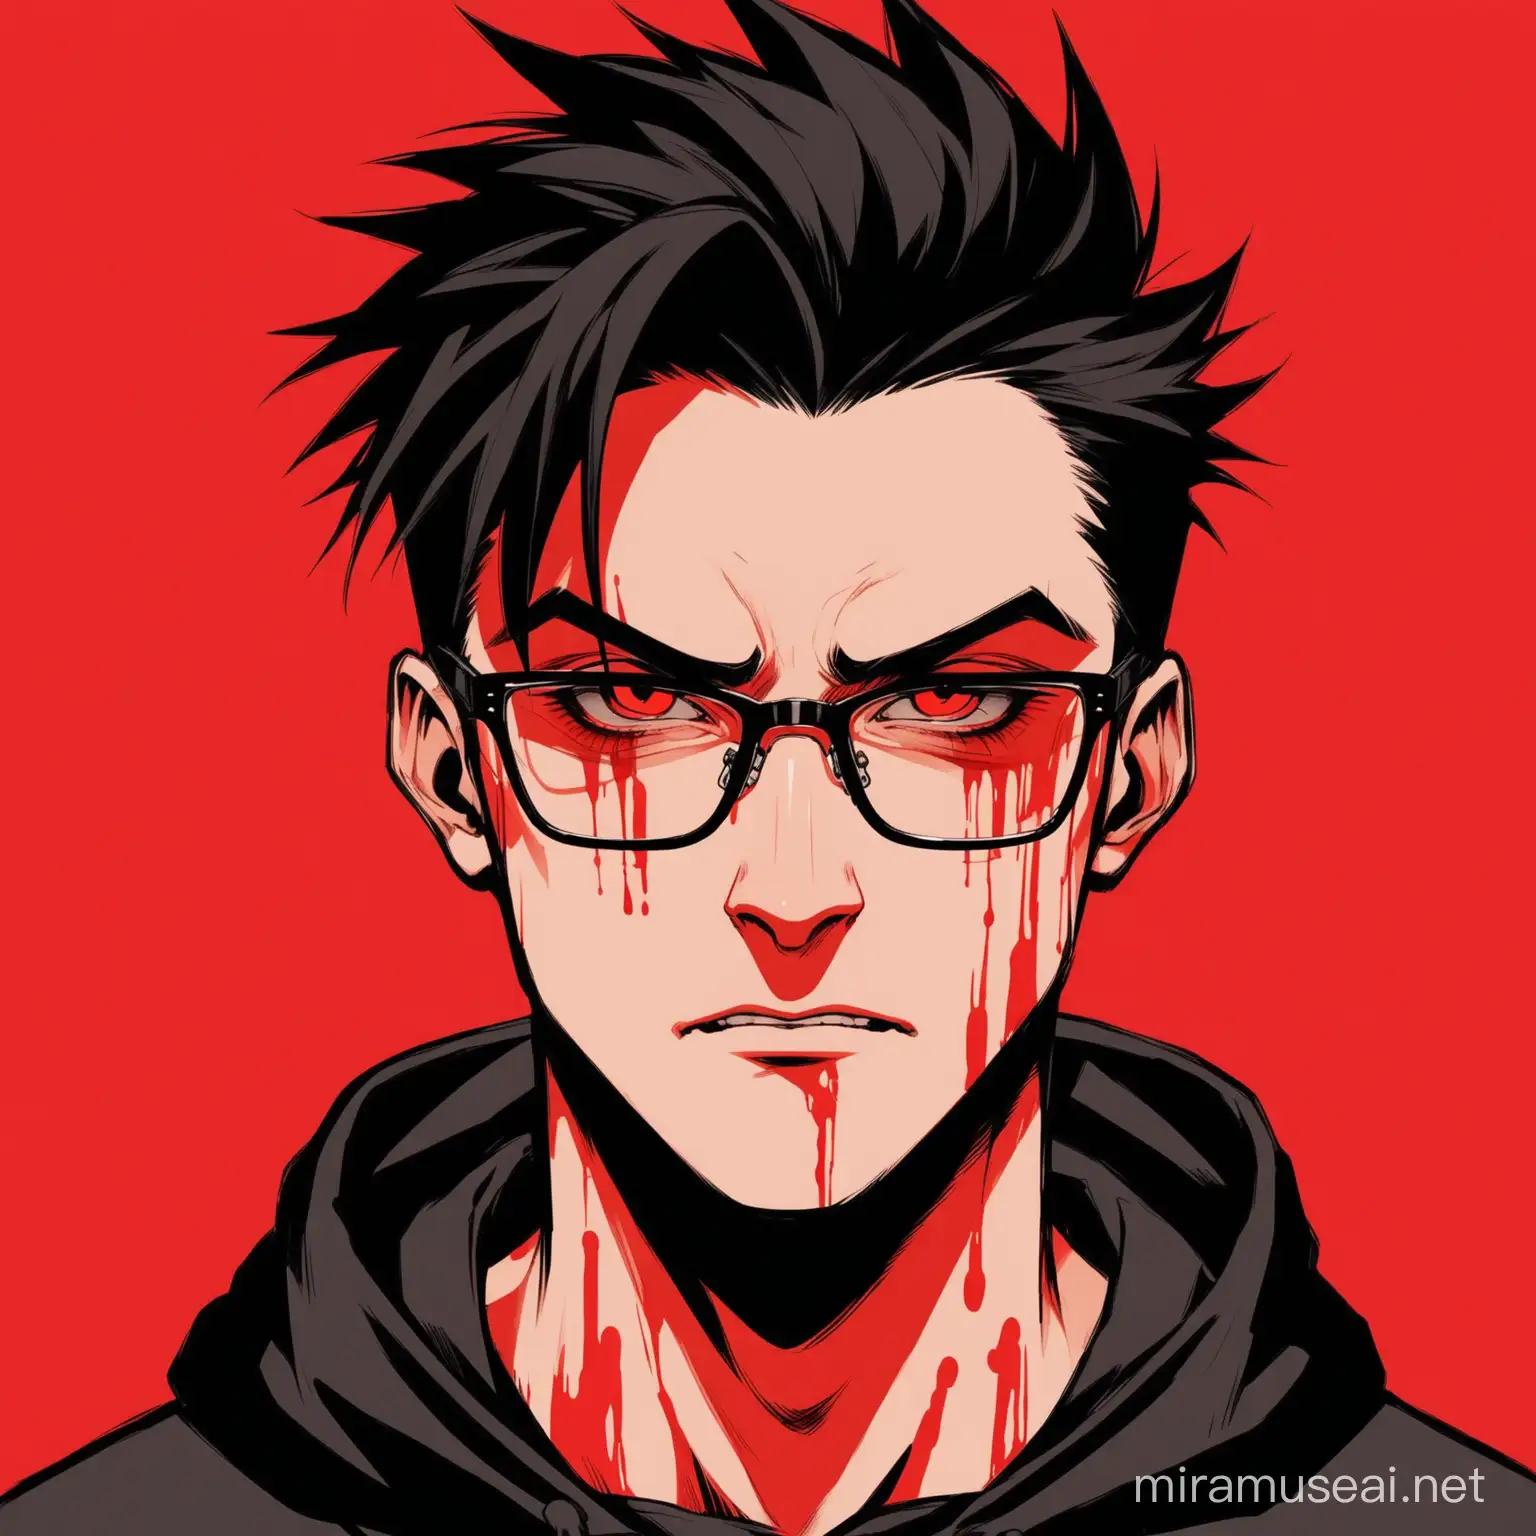 cool,hacker,black hoodie,quiff hairs,glasses,oblong face shape,big nose,small mouth,handsome,aesthetic,psycho,red background,face with blood, killer,evil
